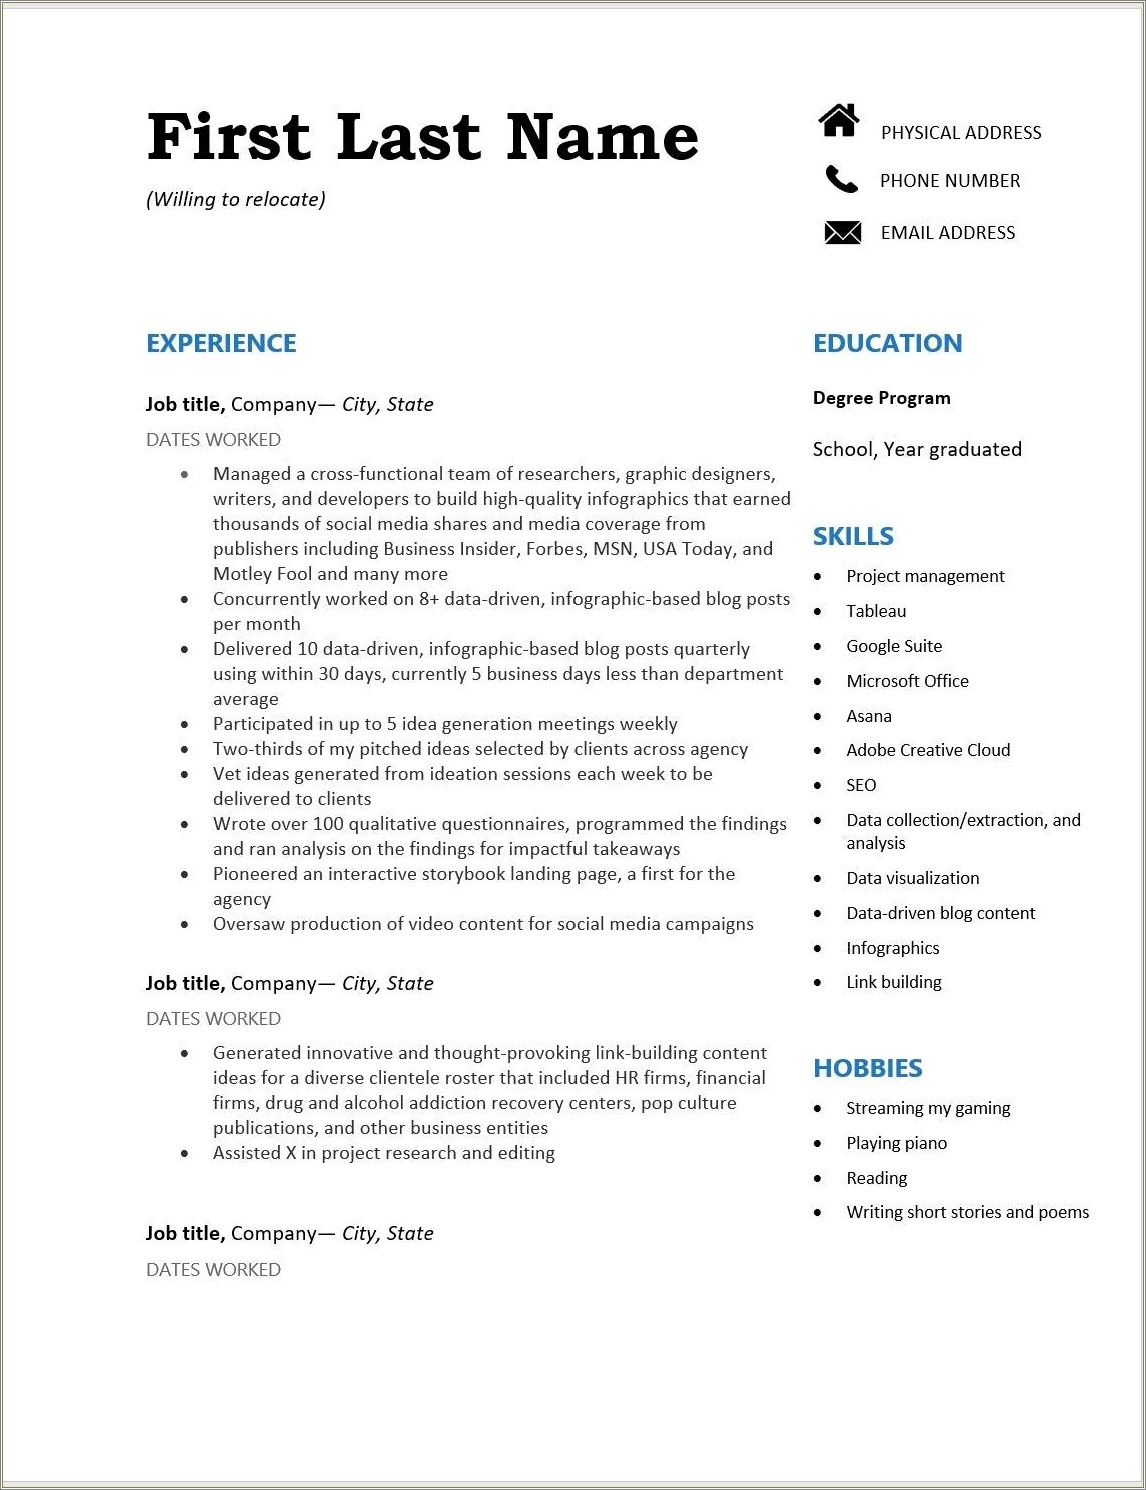 Where To Put Willing To Relocate On Resume